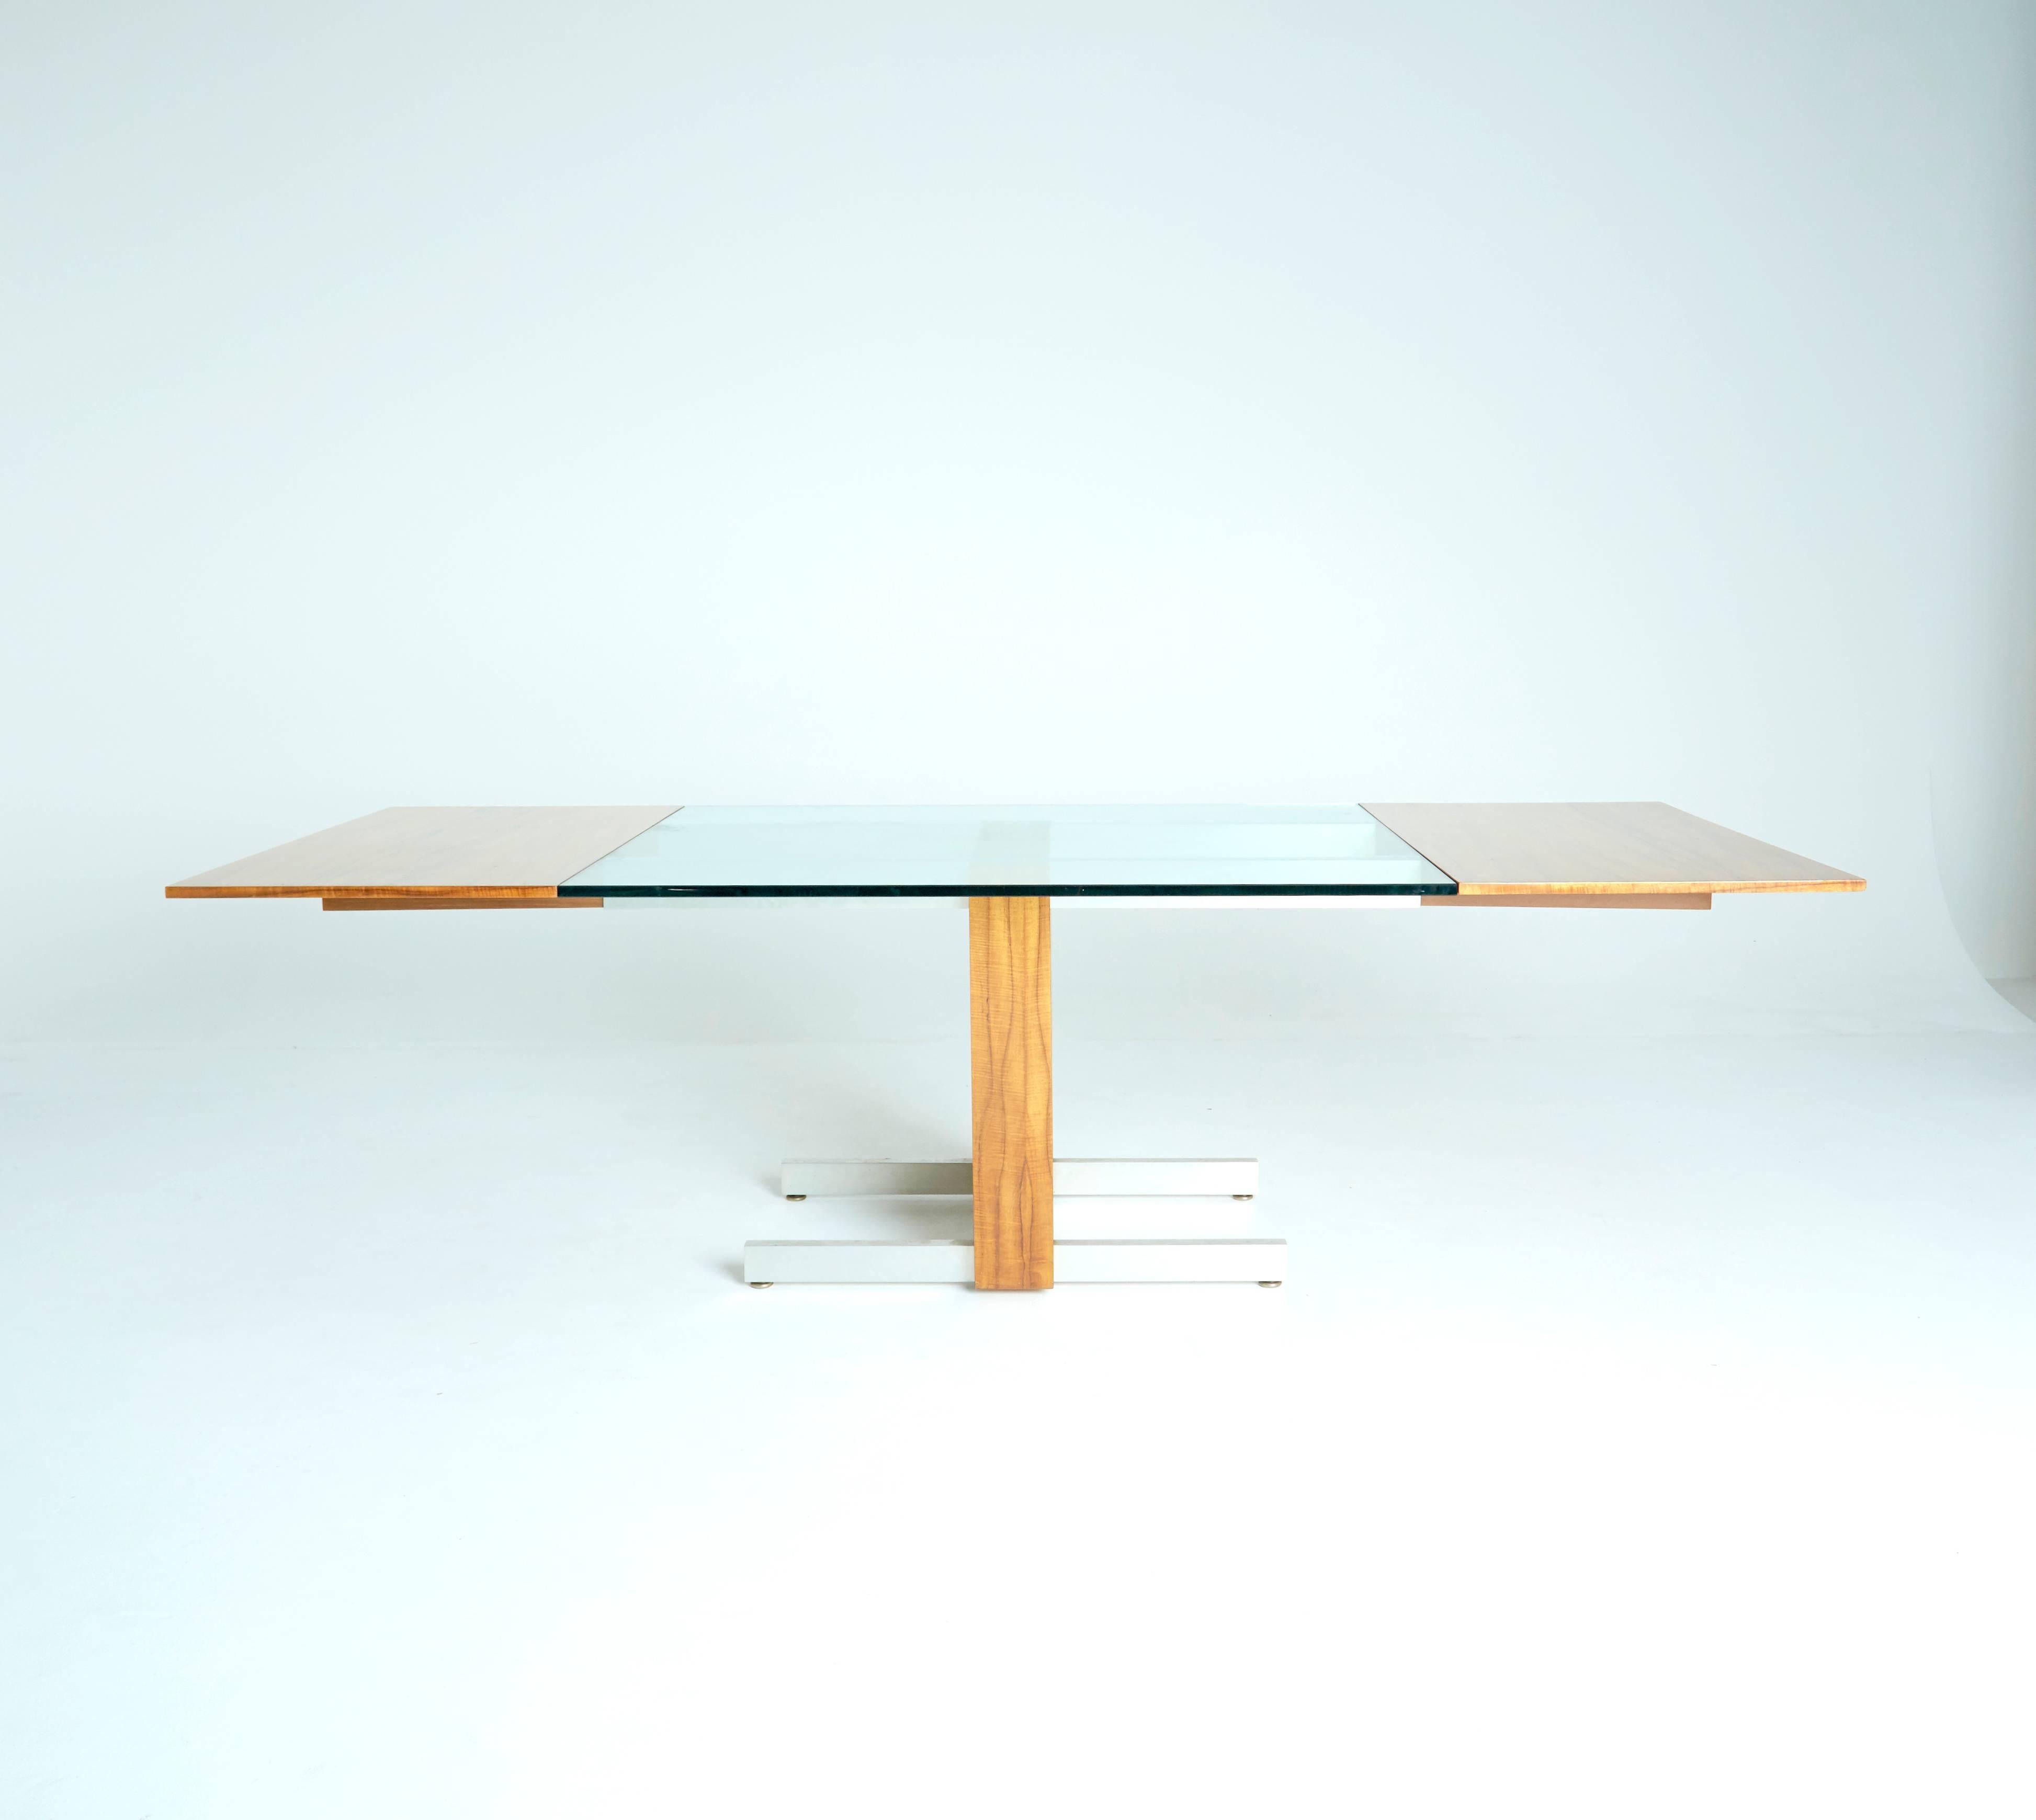 Designed by Vladimir Kagan in the 1960s, this cubic table's sleek, modern design keeps it relevant and prominent throughout the decades. This table is perfect either as a dining table or a conference table, as two removable wood leaves border either